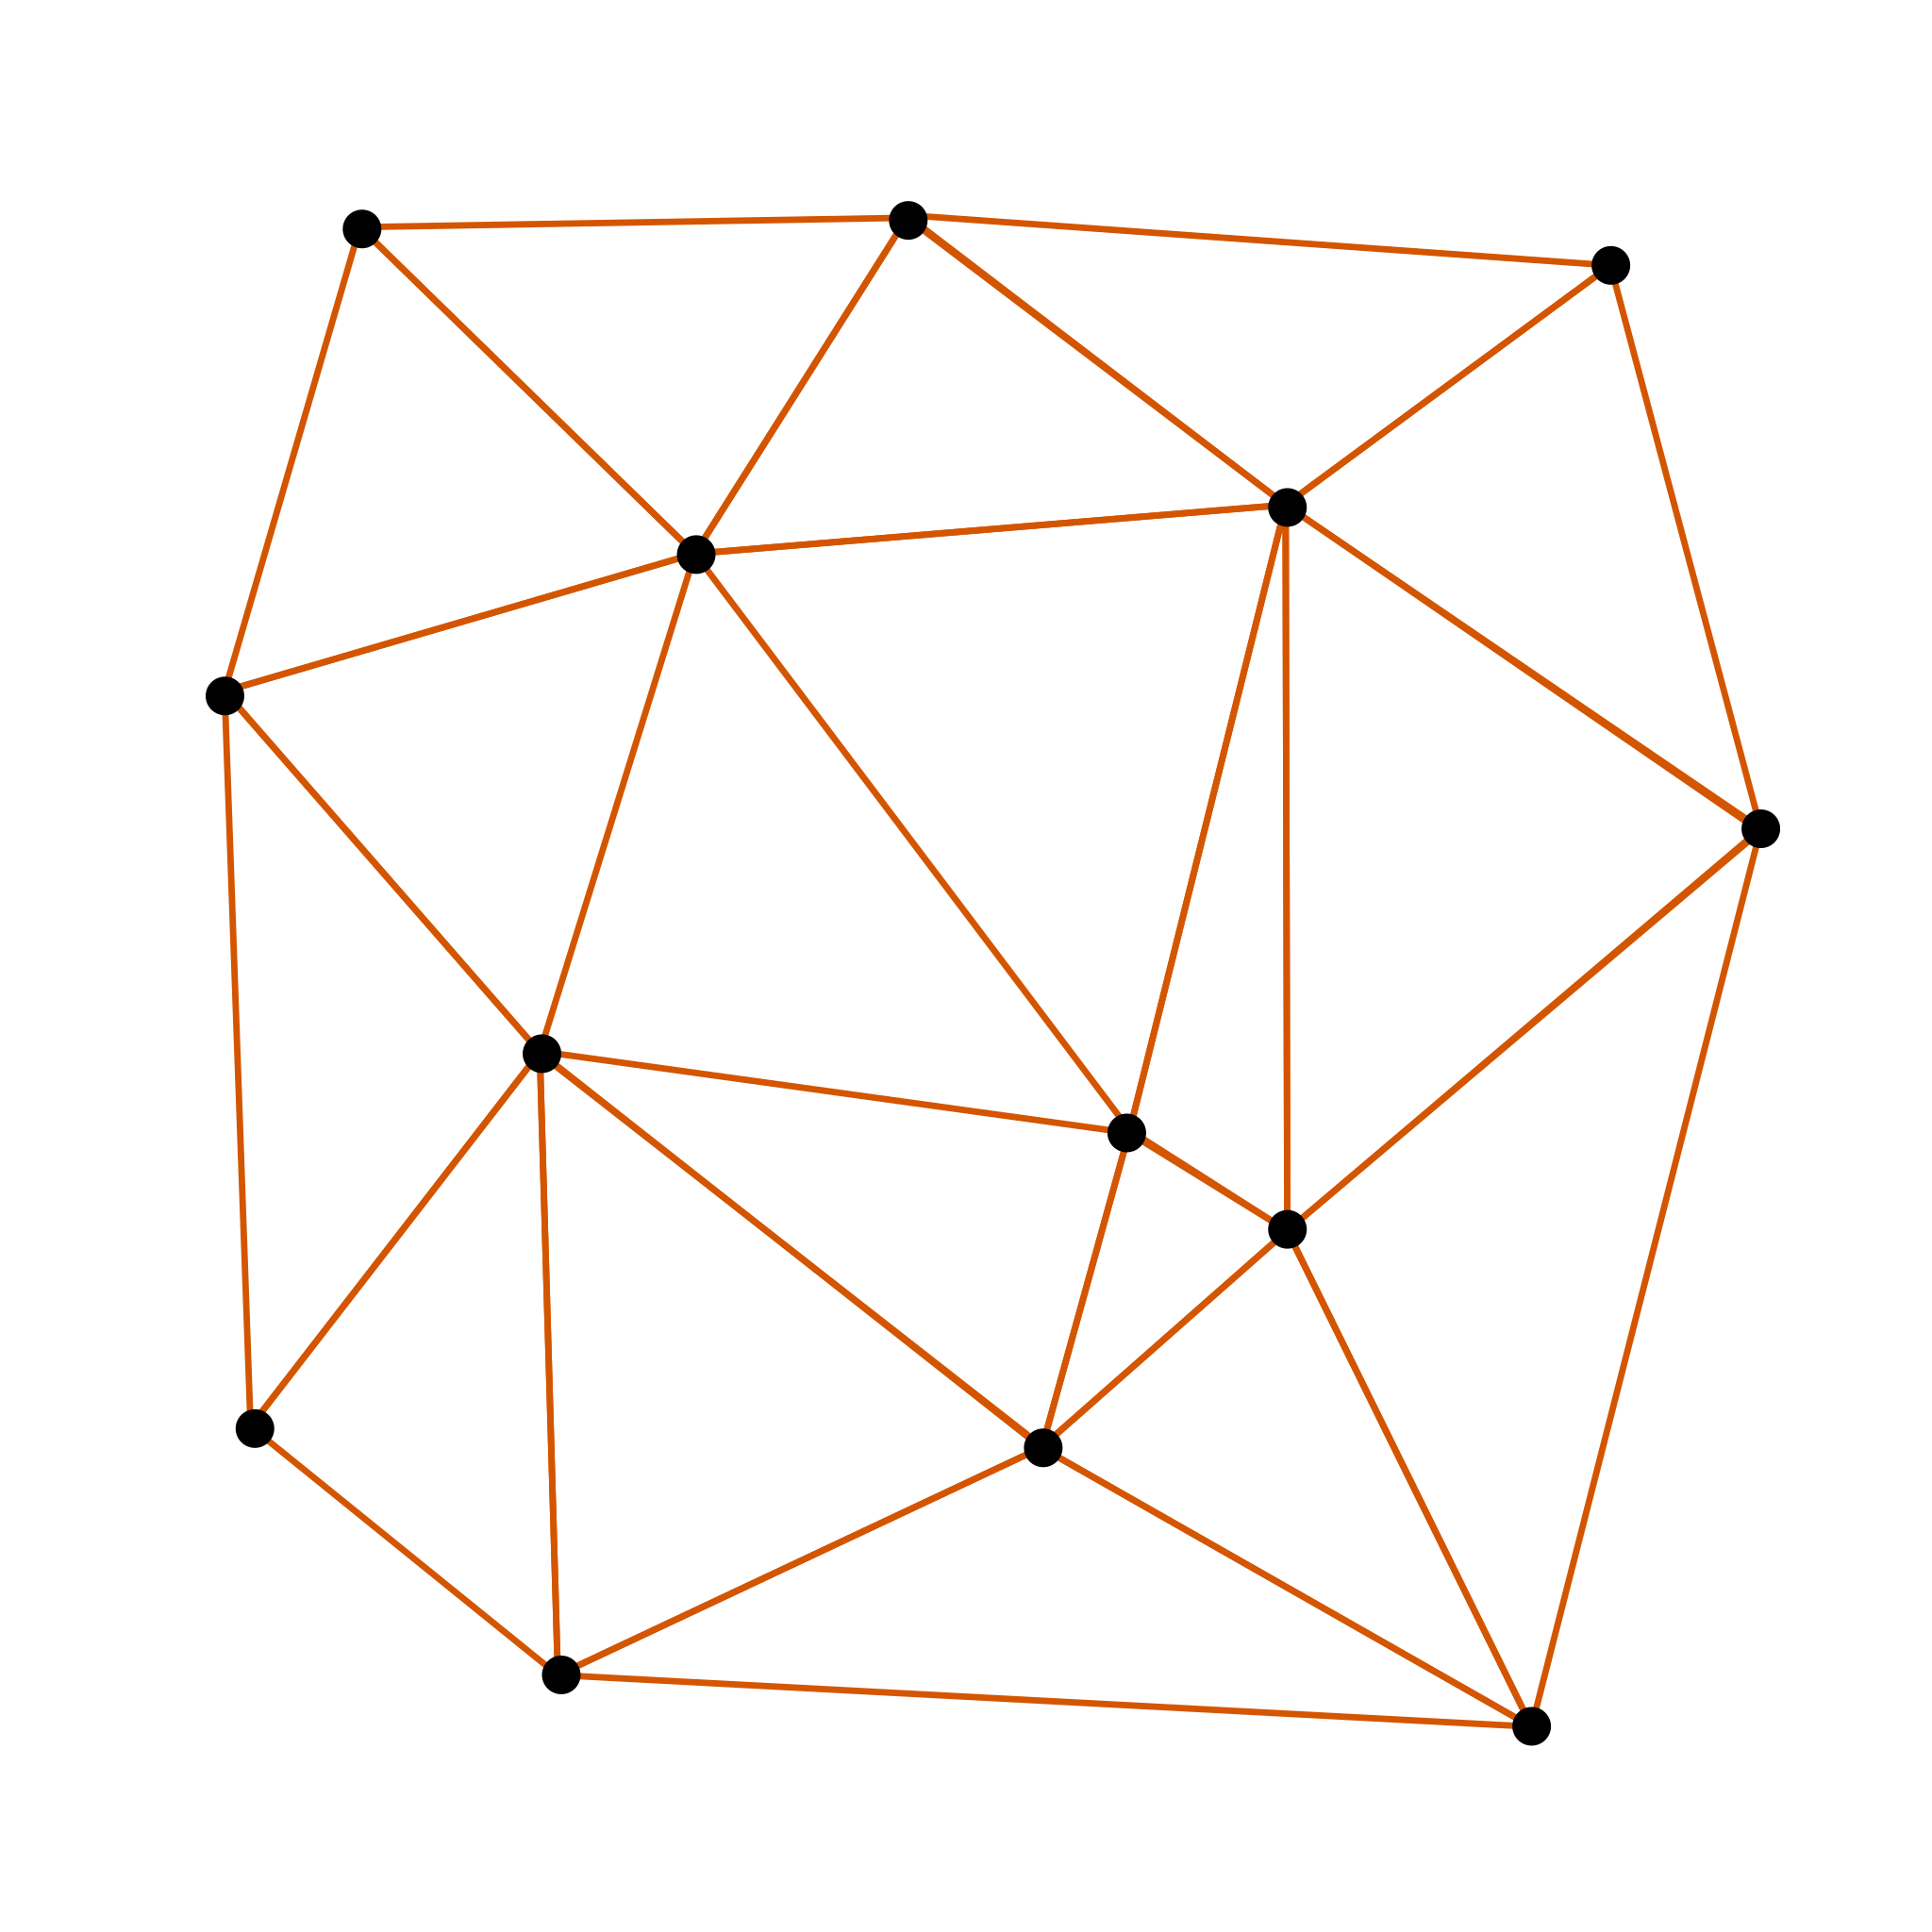 File:Delaunay geometry.png - Wikipedia